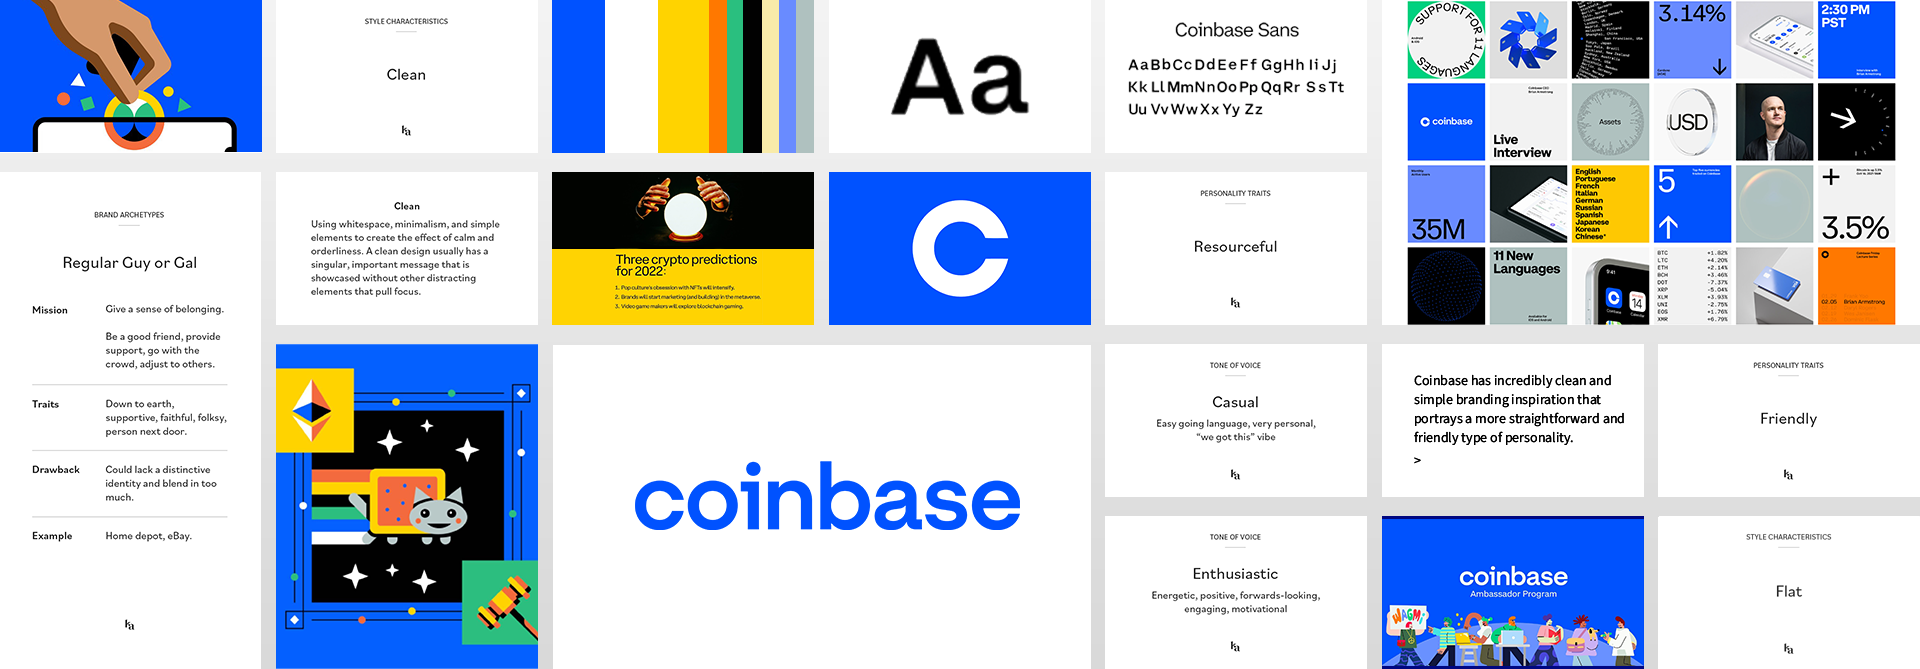 The most recent Coinbase rebrand